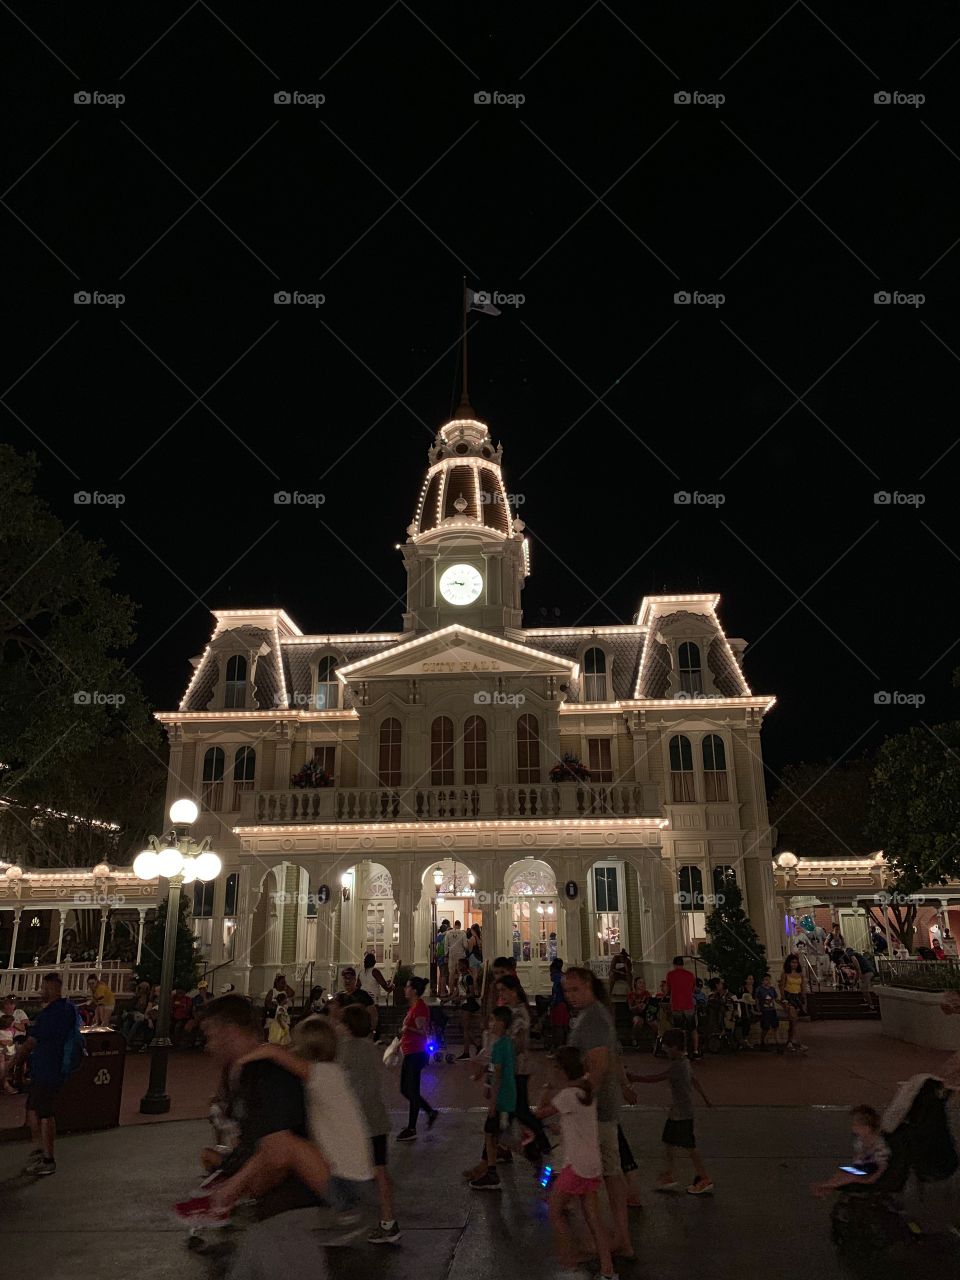 #day124 Everyday WDW Orlando Florida.  I have been lost on Disney Properties consecutively since 4/3/19 You can find my encounter https://www.facebook.com/selsa.susanna or on IG selsa_susanna Disney’s Magic Kingdom 8-4-19 Sunday 